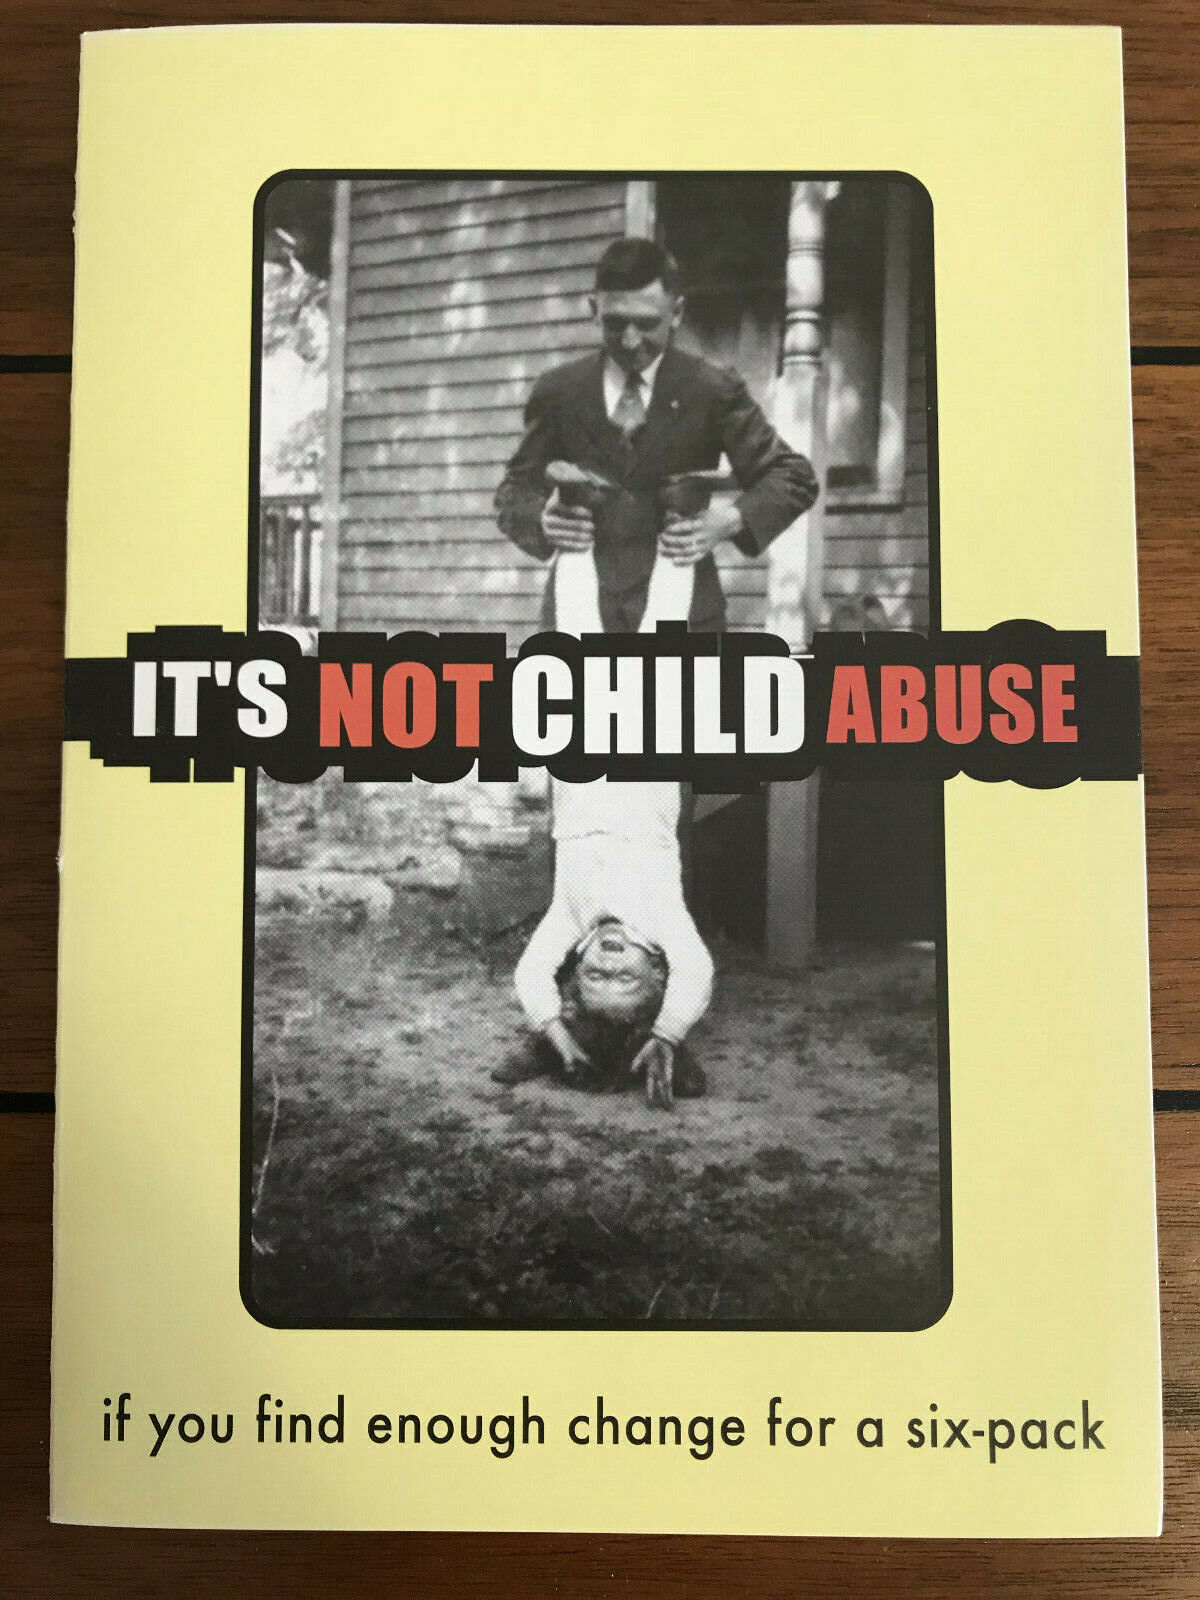 50 THANKLESS GREETINGS Greeting Cards IT'S NOT CHILD ABUSE - Comic Card Invite